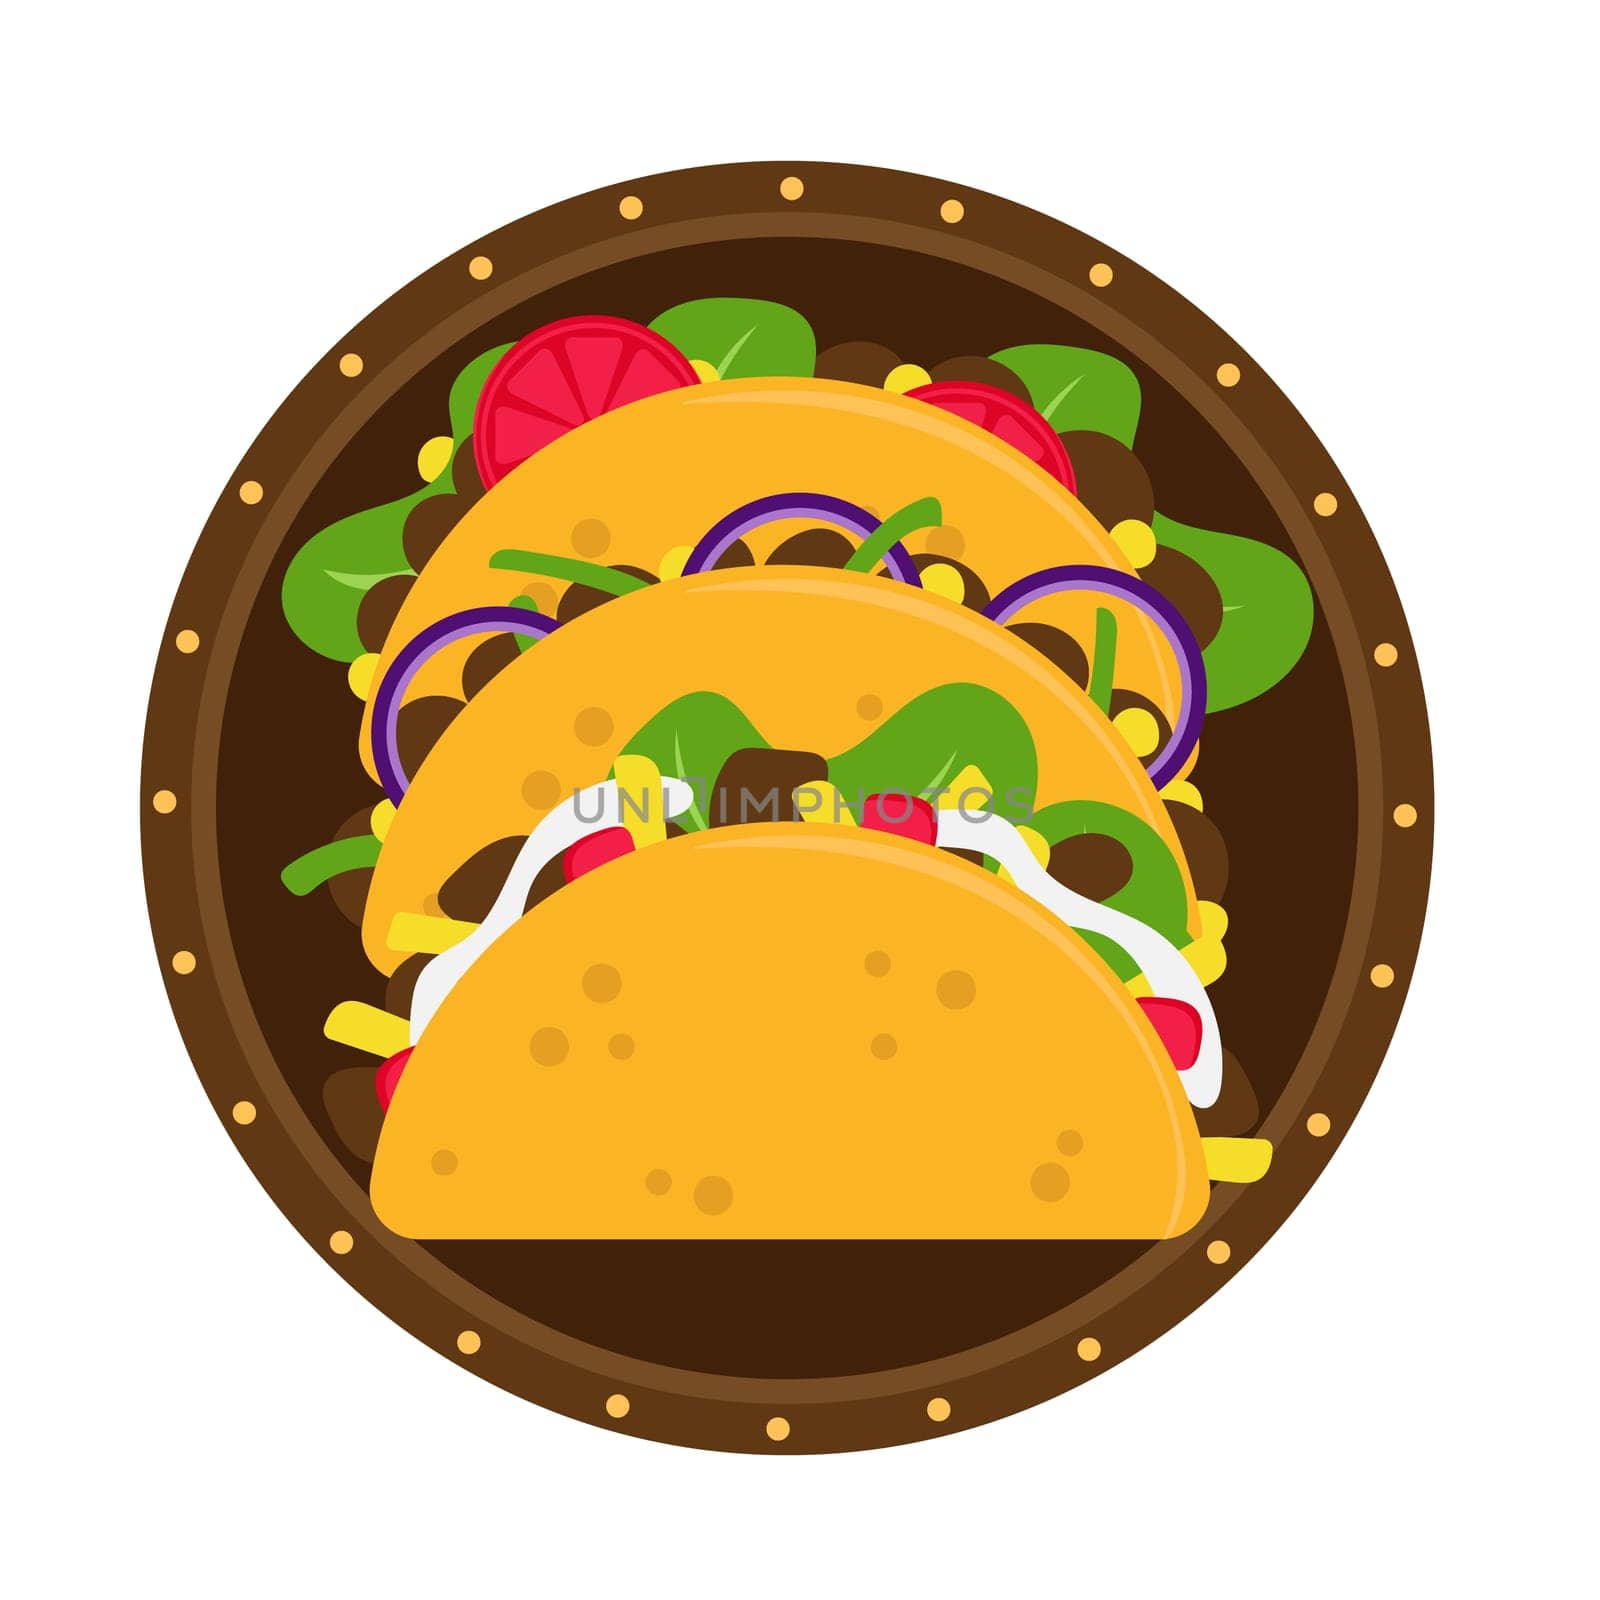 Tacos traditional Mexican cuisine dish food item from cafe menu. Vector illustration. Three tacos on a plate